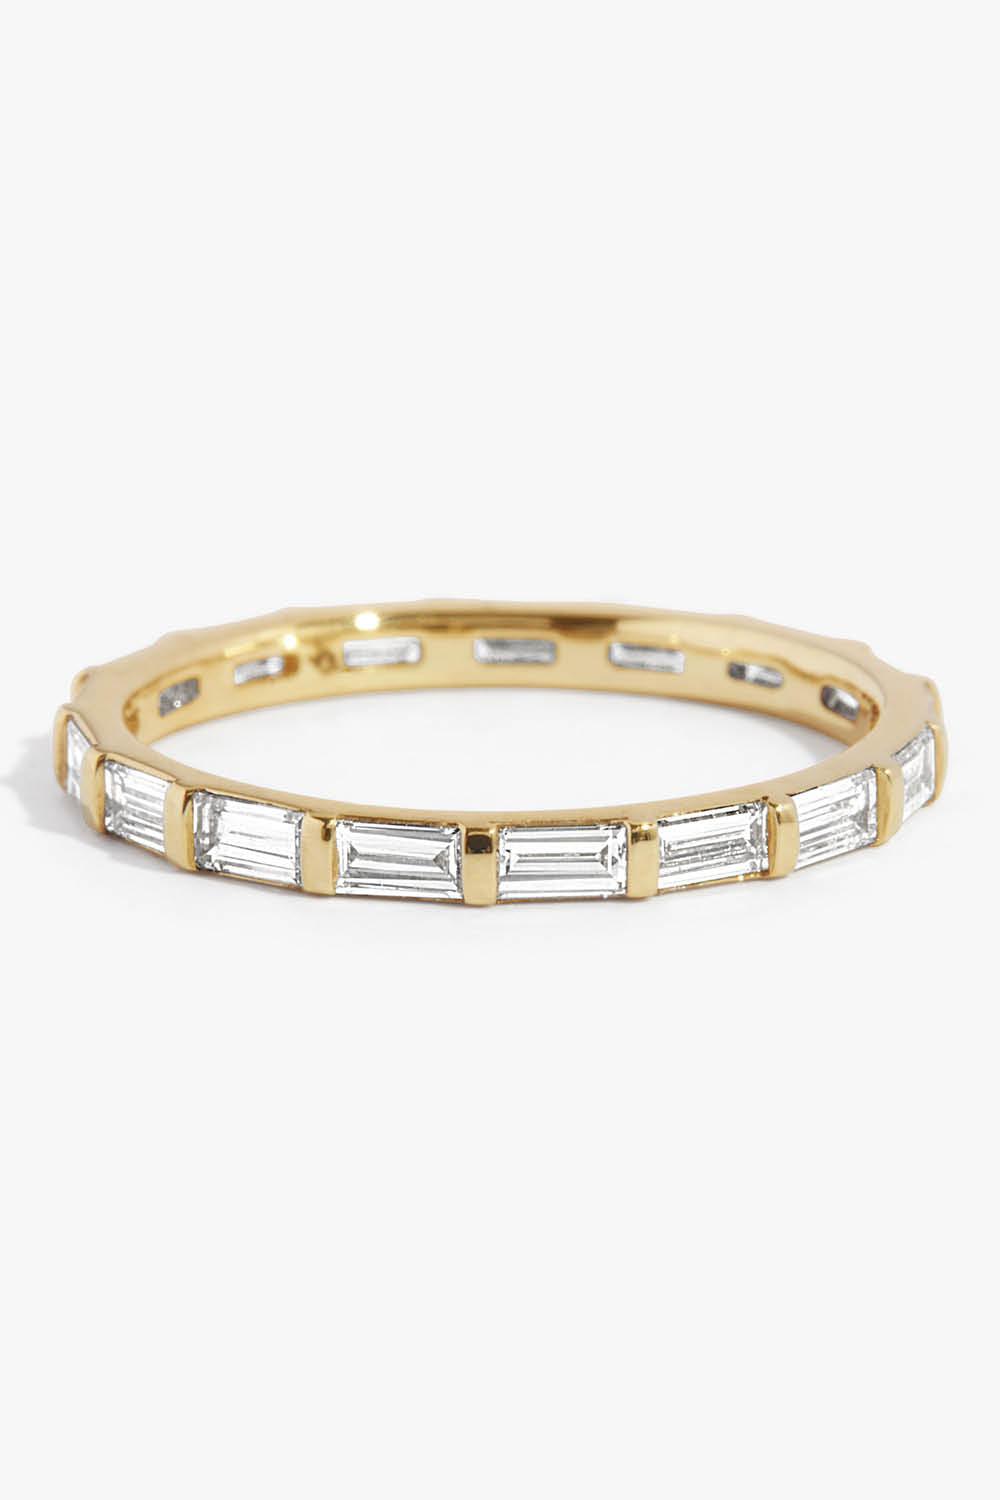 VRAI Baguette Infinity Band in Yellow Gold